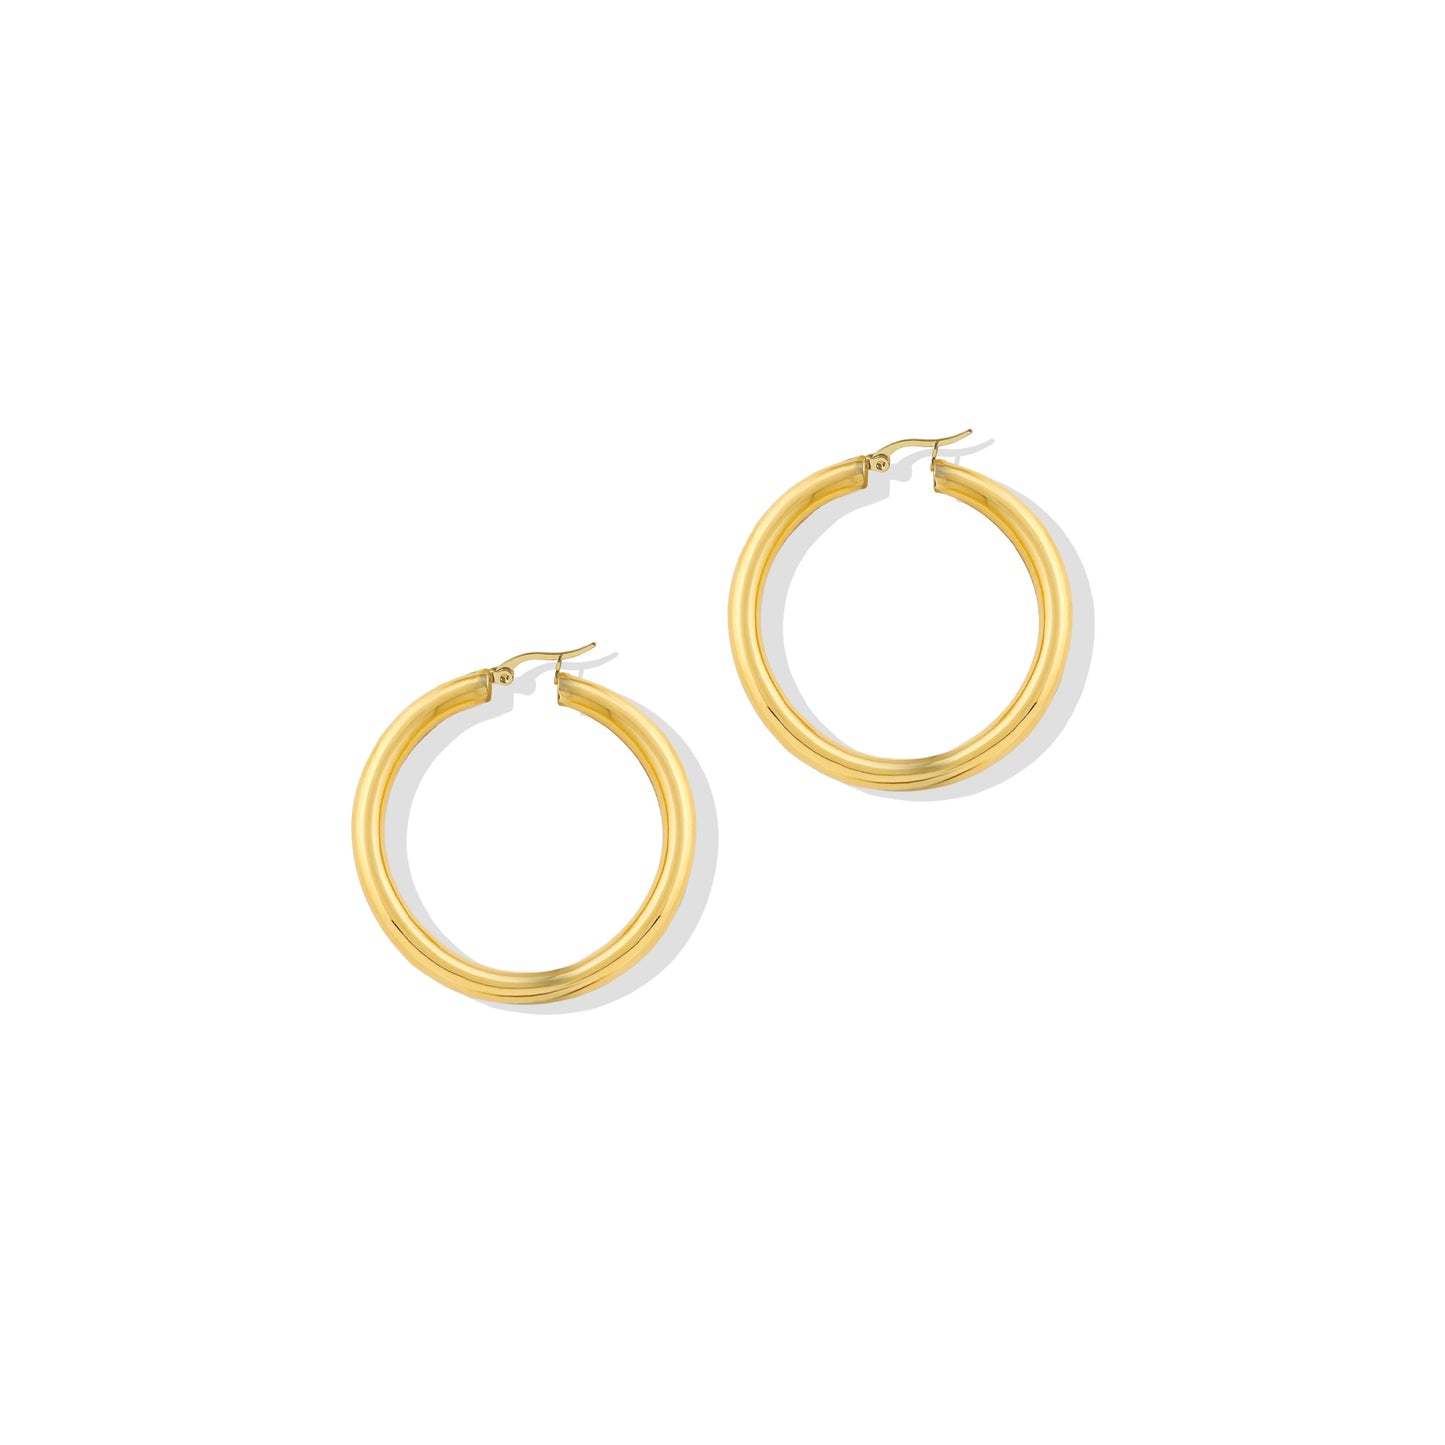 The Alex Essential Hoops